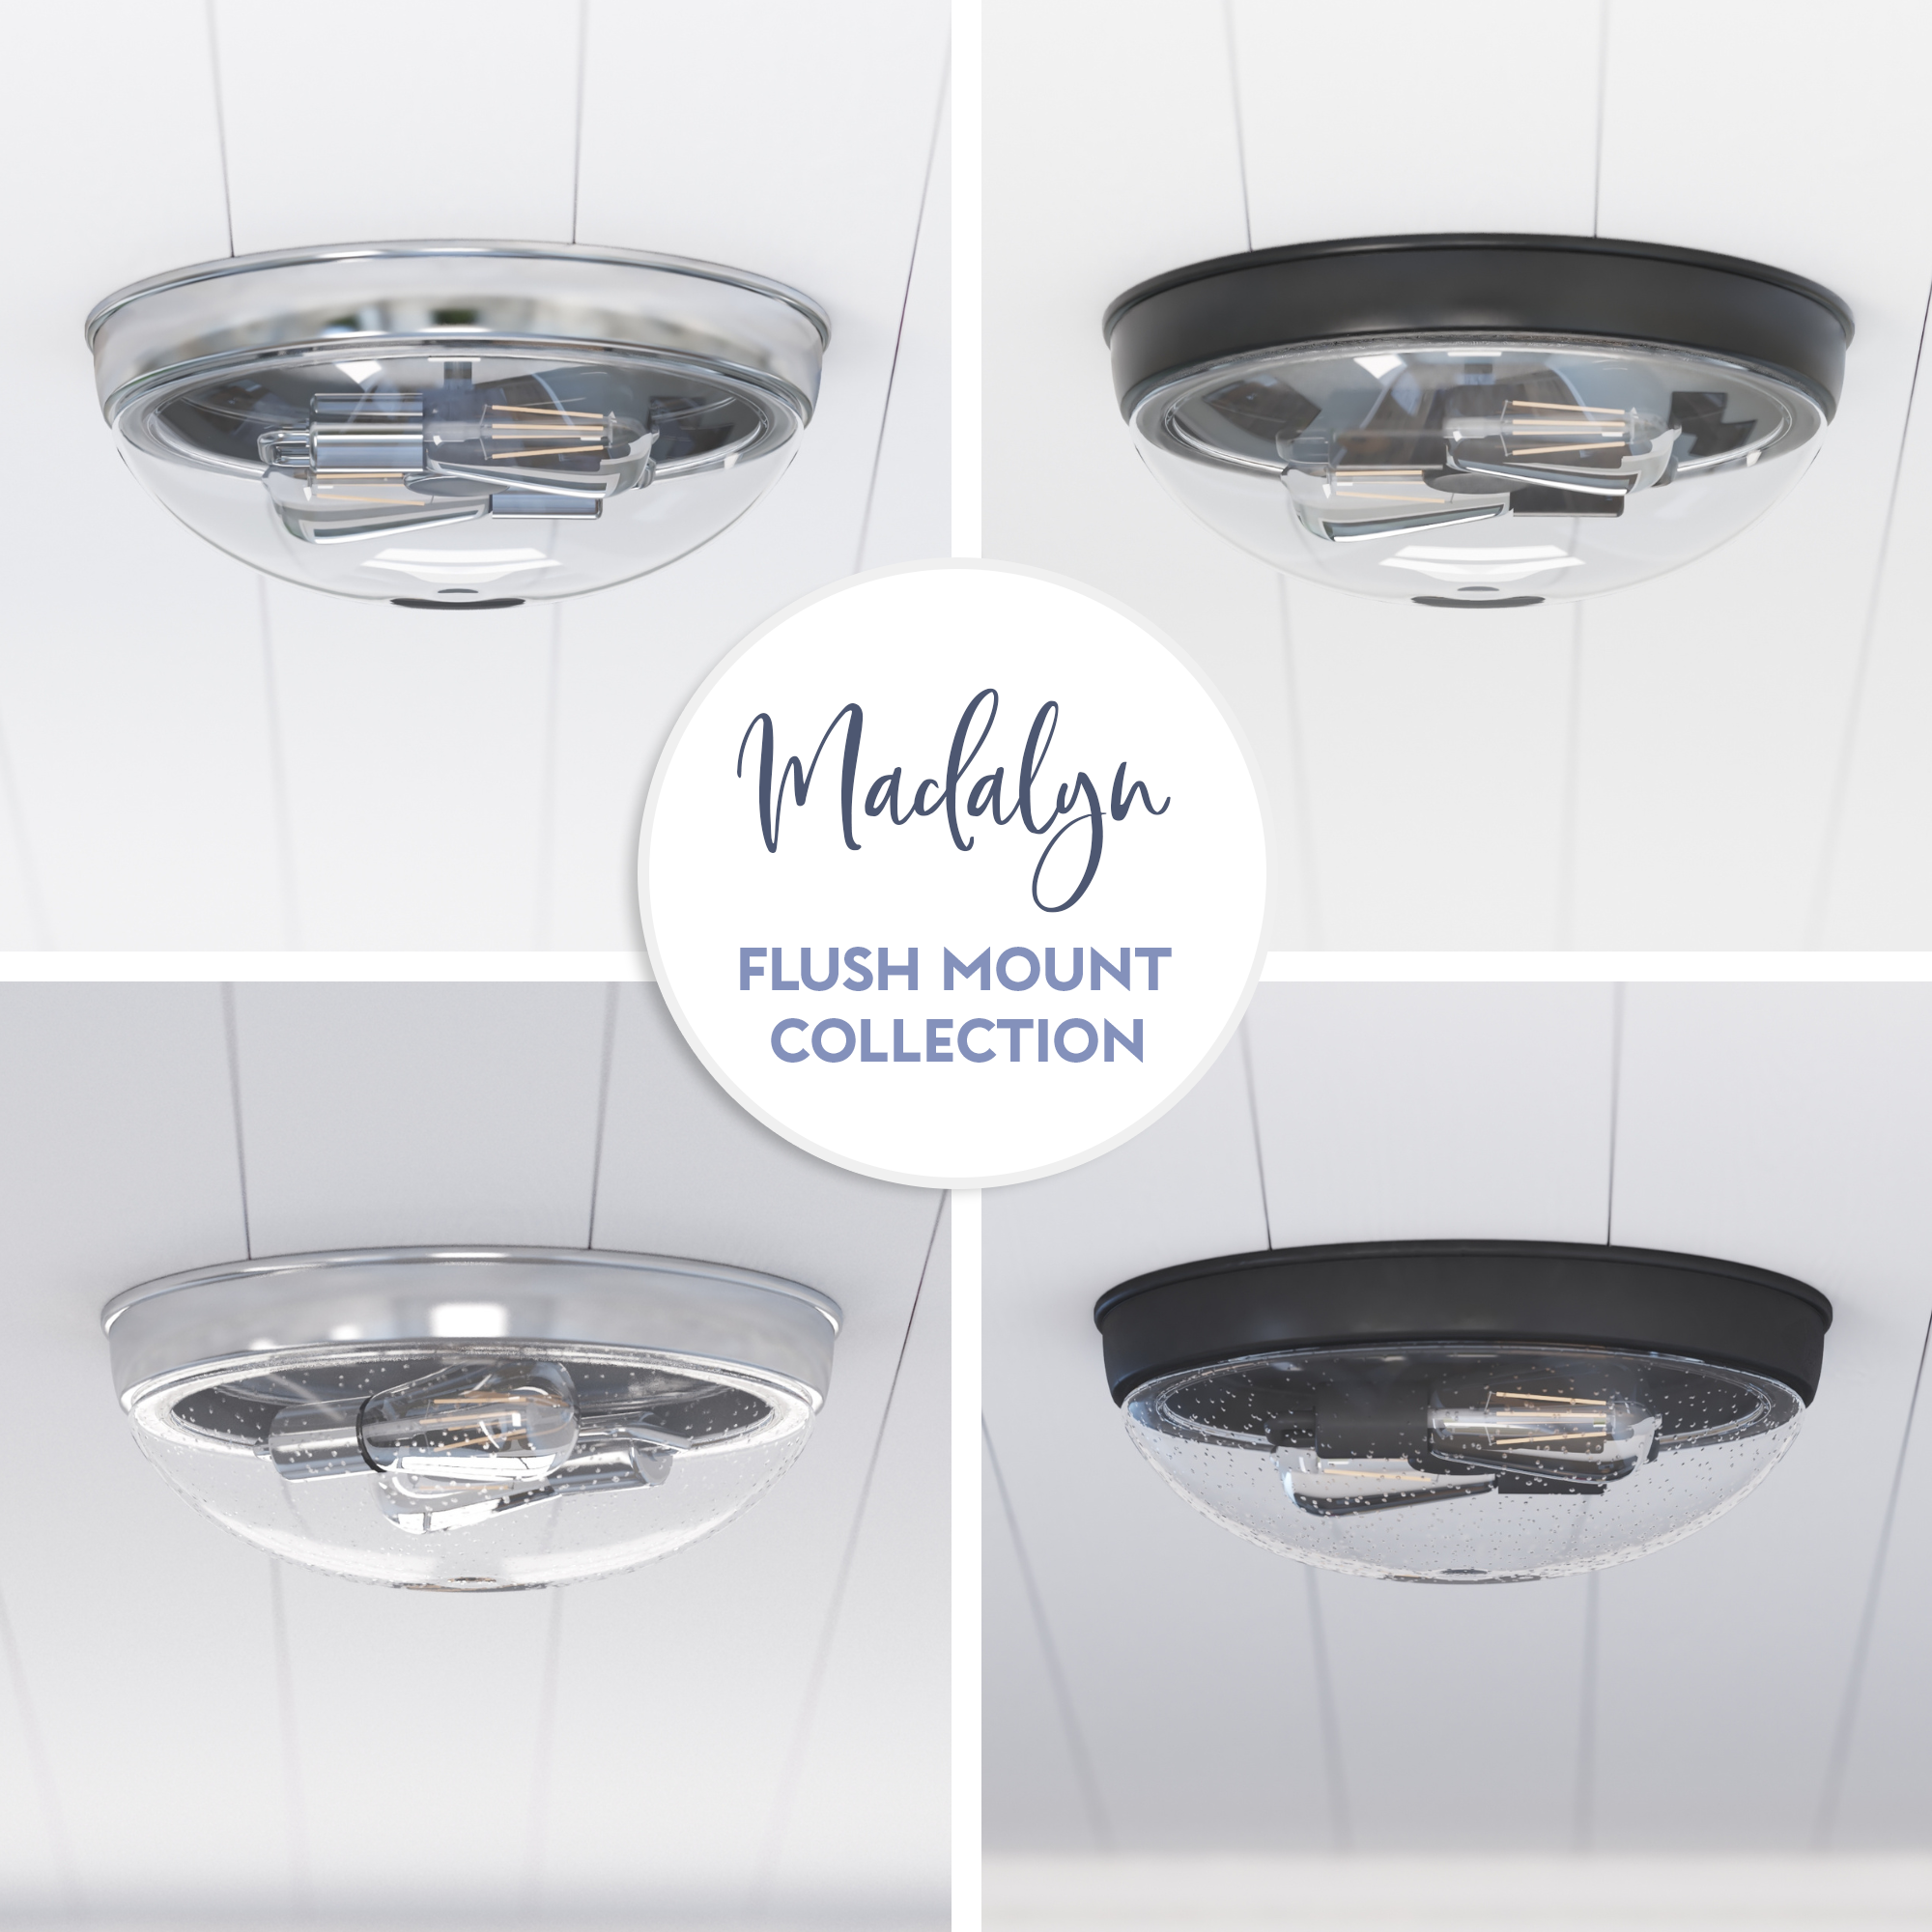 Madalyn, Dome Flushmount Light Fixture, Clear Glass, Espresso by Prominence Home